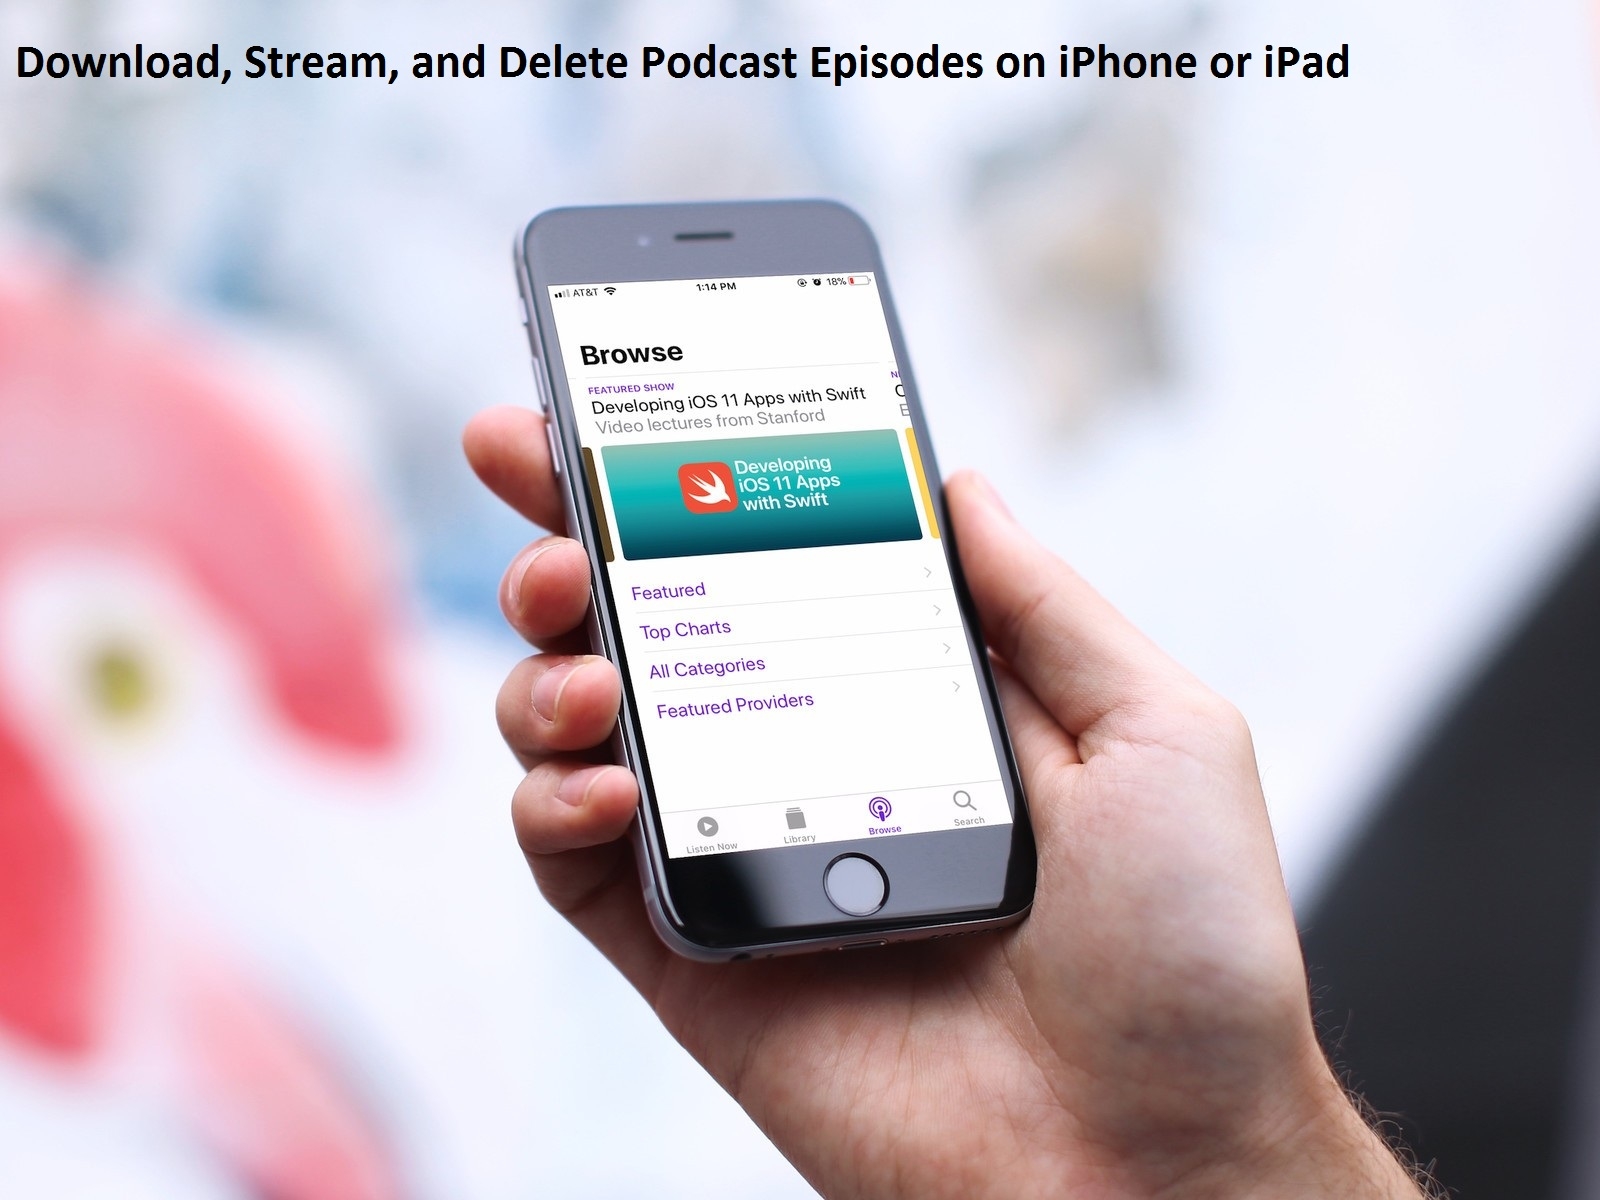 How to Save and Download Podcast Episodes on iPhone and iPad